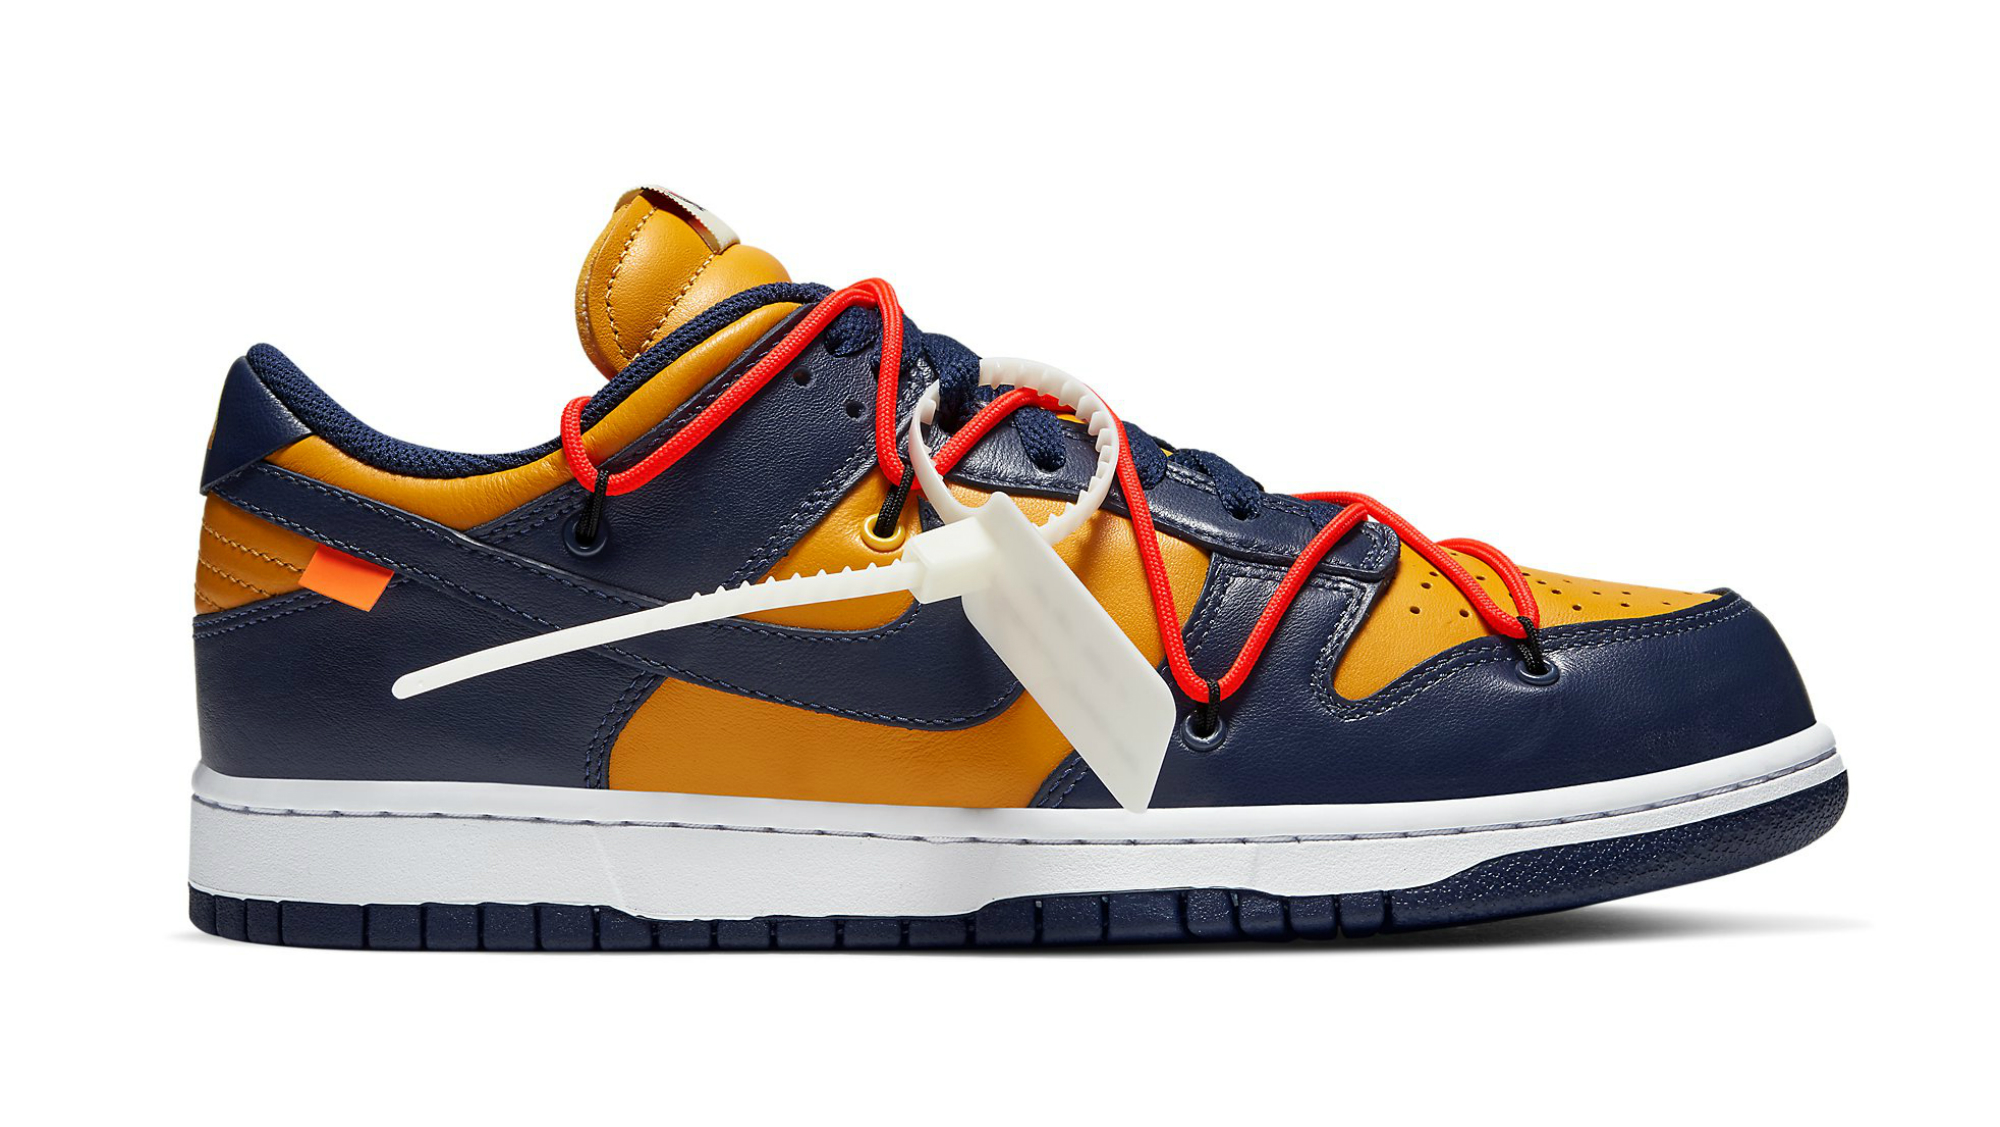 The Off-White x Futura x Nike Dunk Low is the sneaker grail you